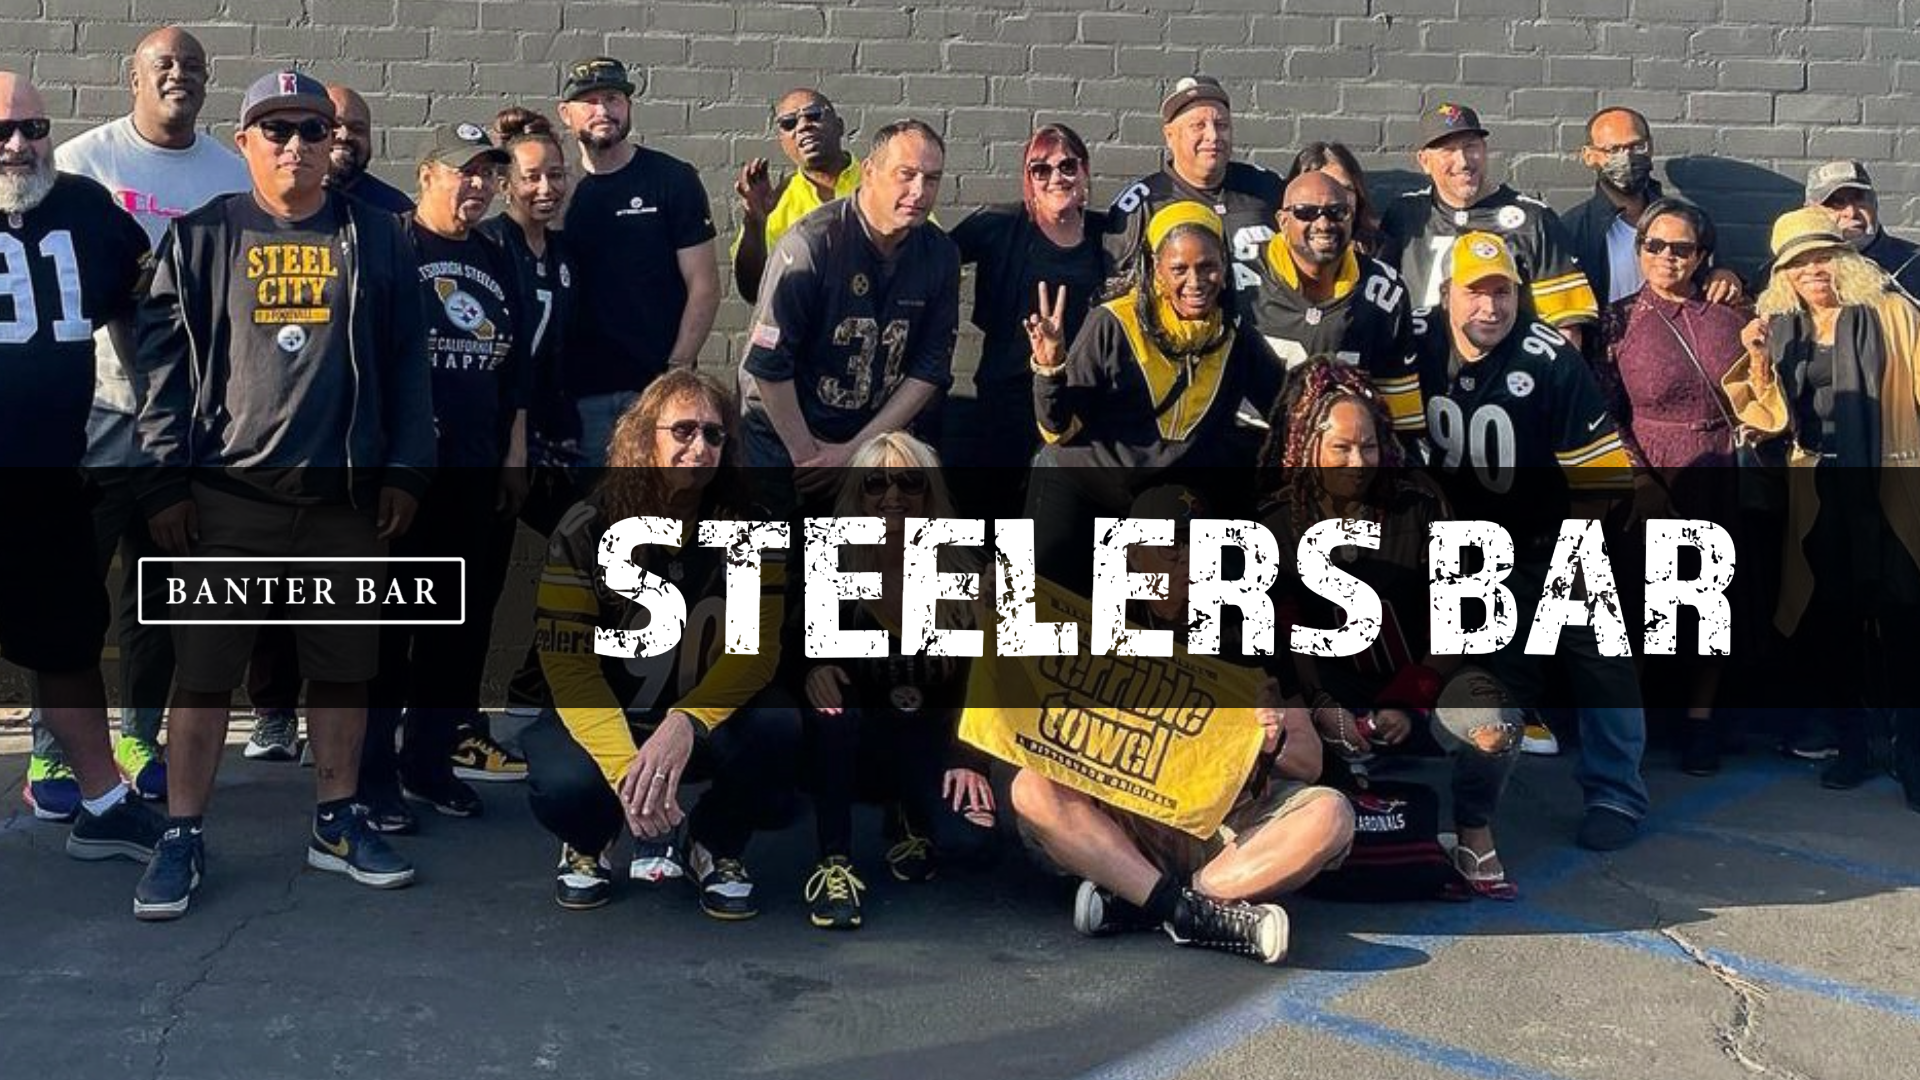 Crowd of Steelers fans stand behind Banter Bar West Los Angeles